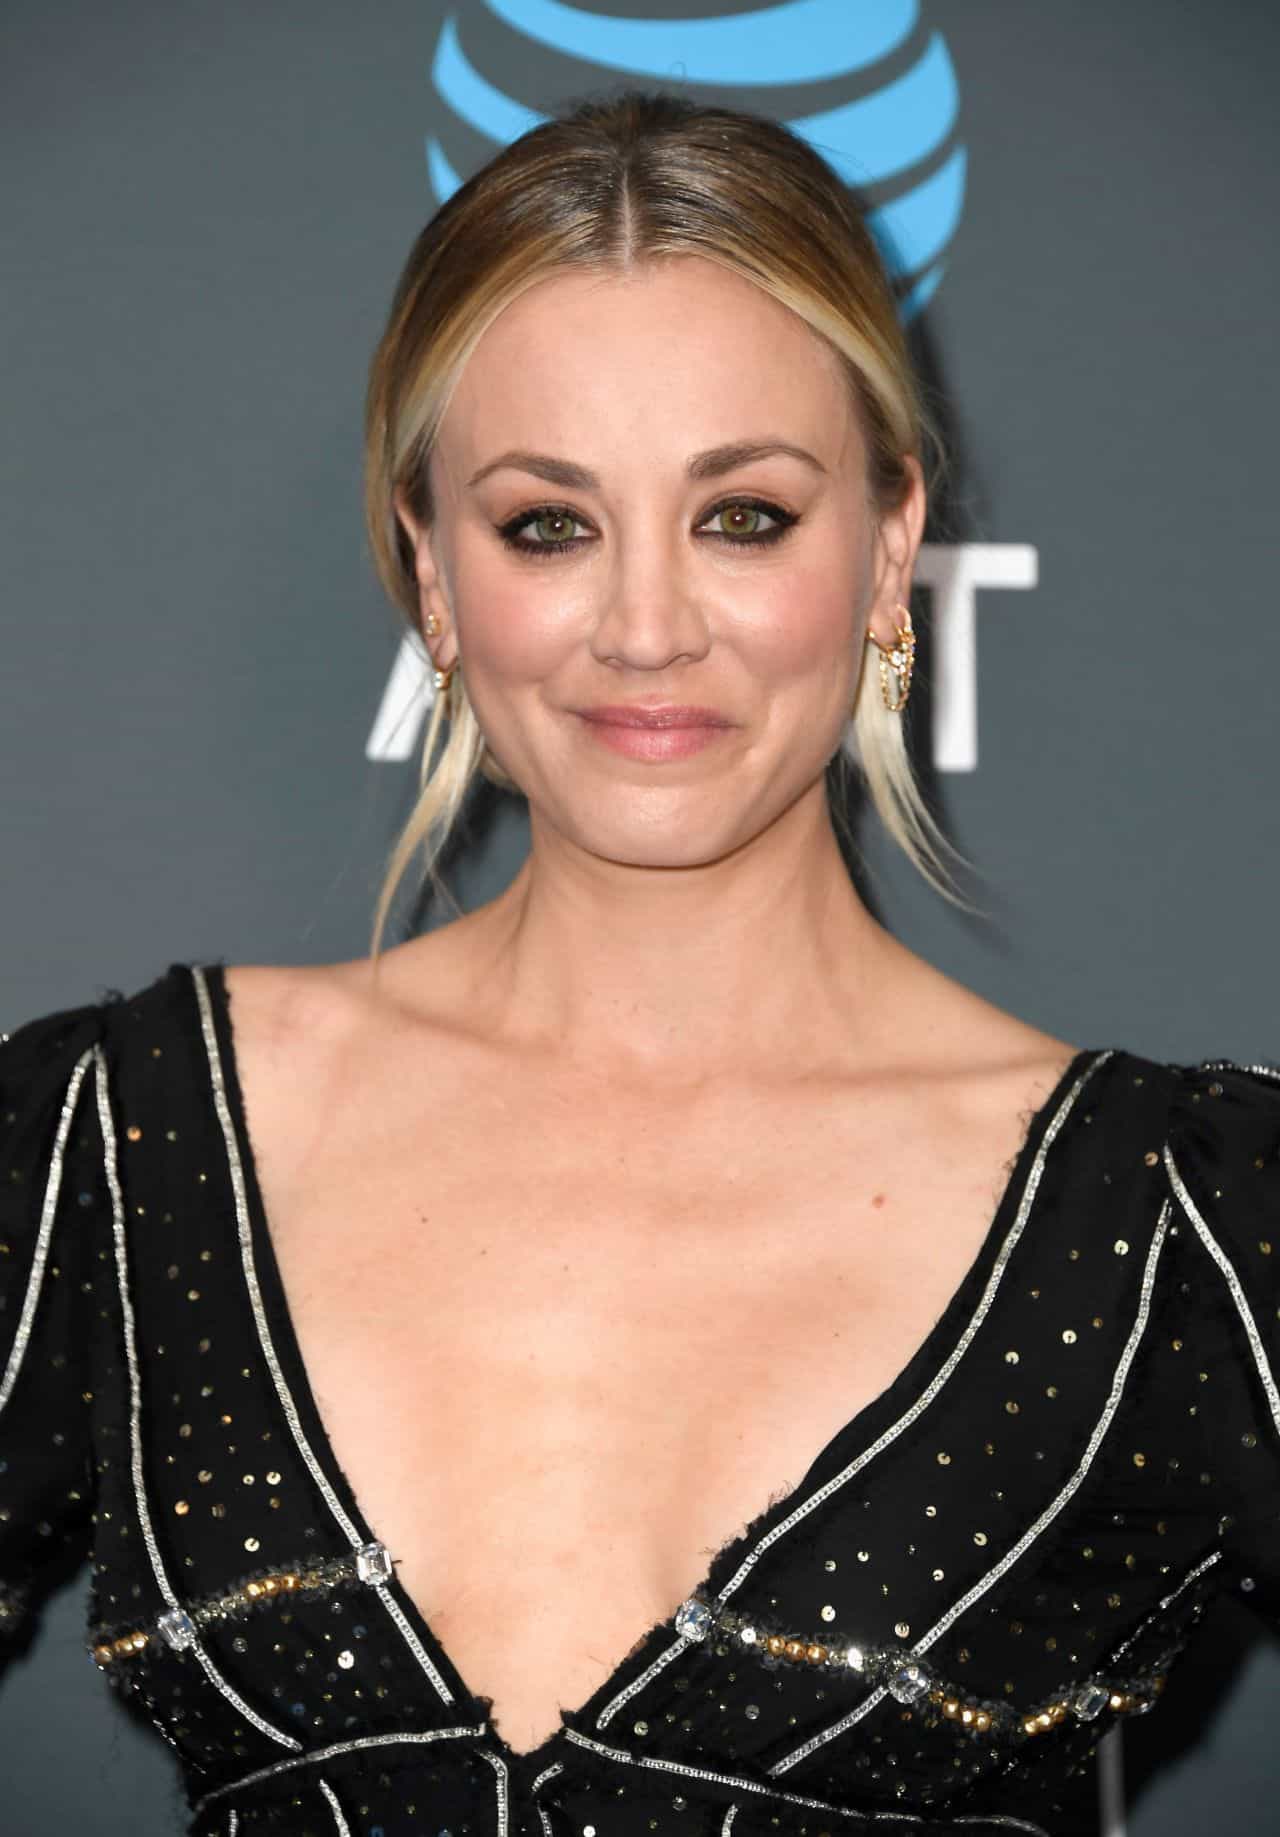 Kaley Cuoco Stuns in Sultry Black and Gold Gown at Critics' Choice Awards